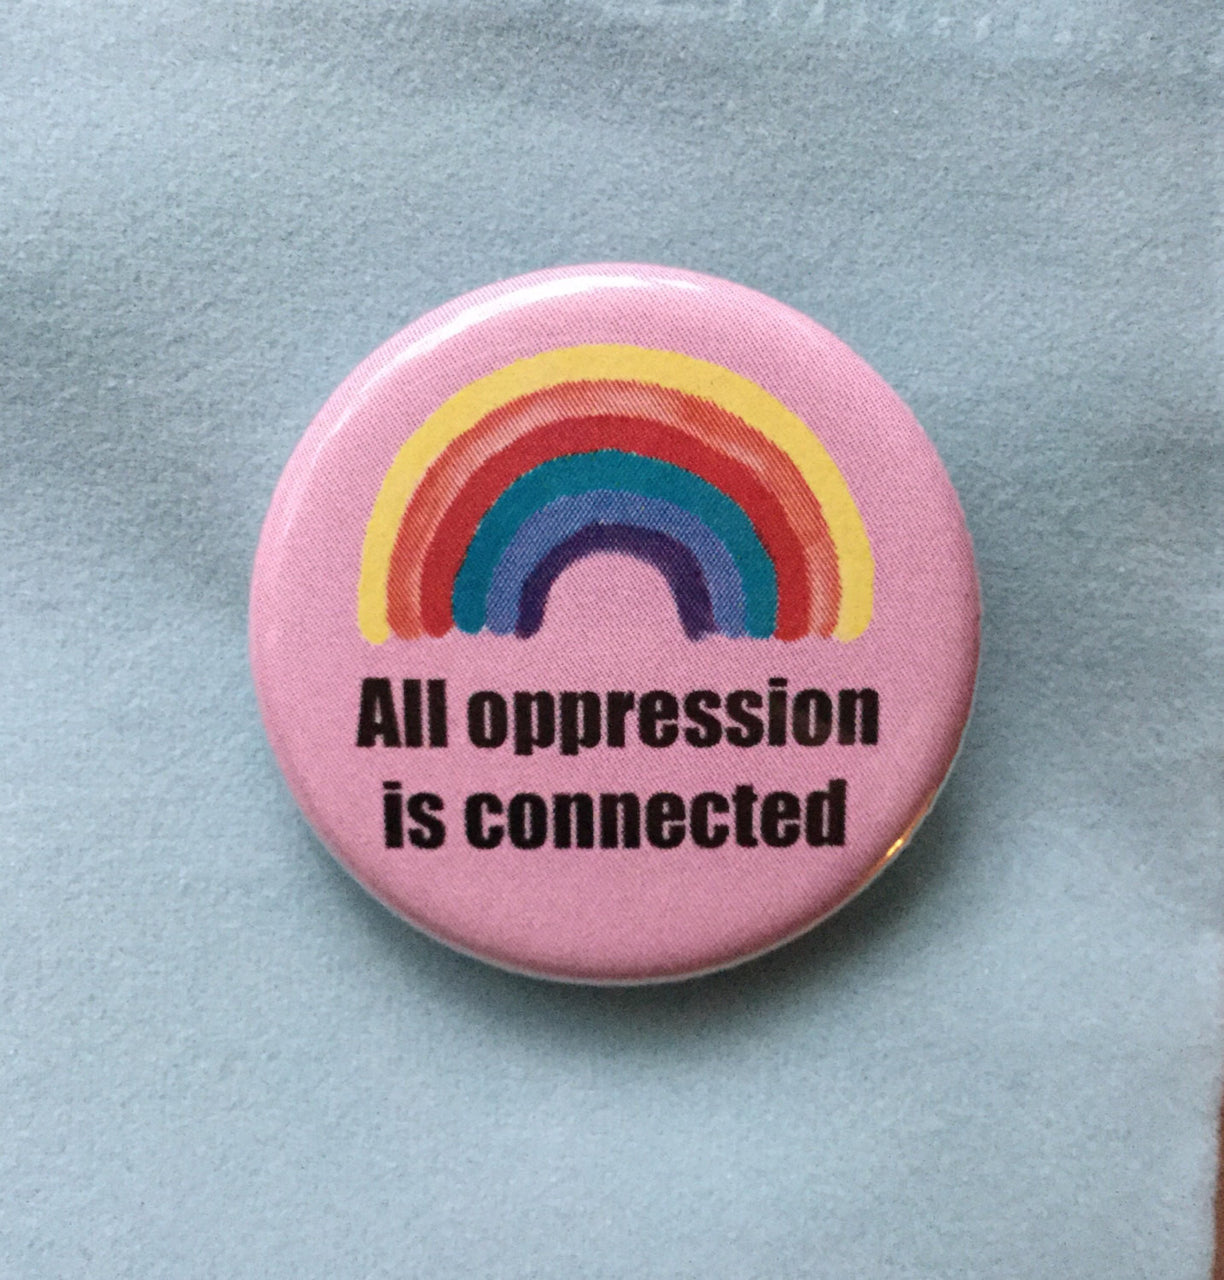 All oppression is connected button / Intersectionality button - Radical Buttons